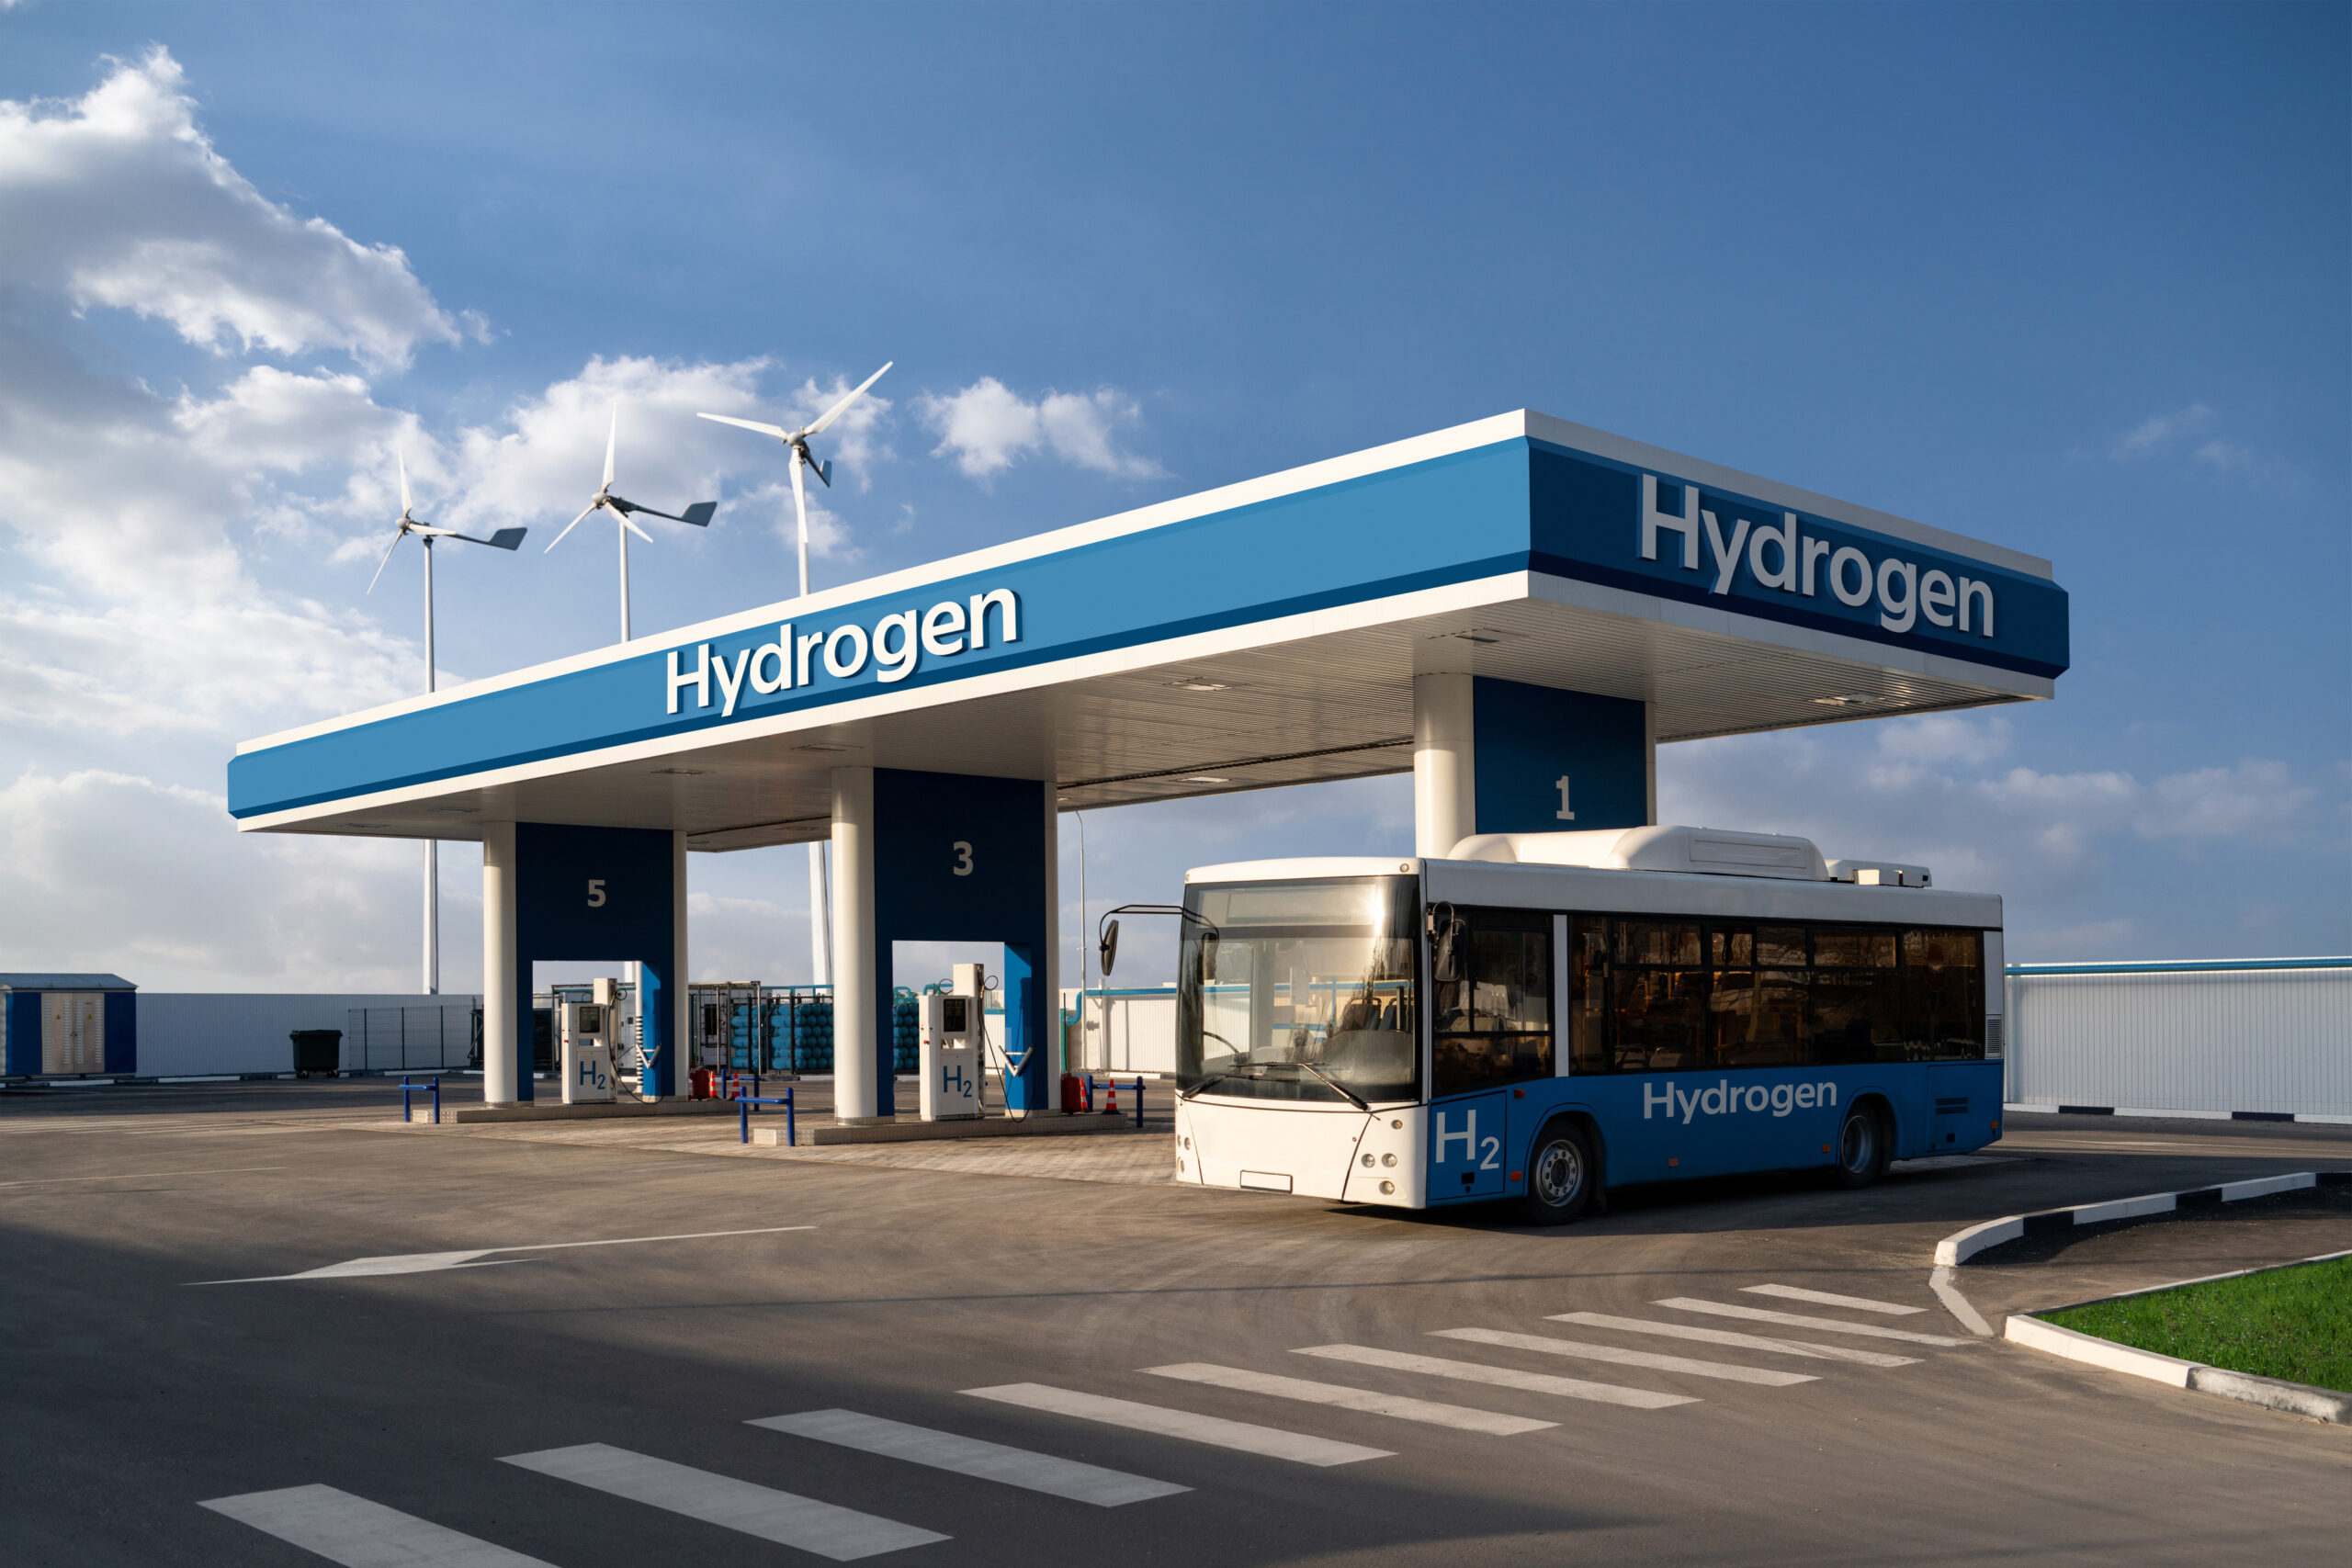 QLD Greenlights Hydrogen Fuel Cell Facility